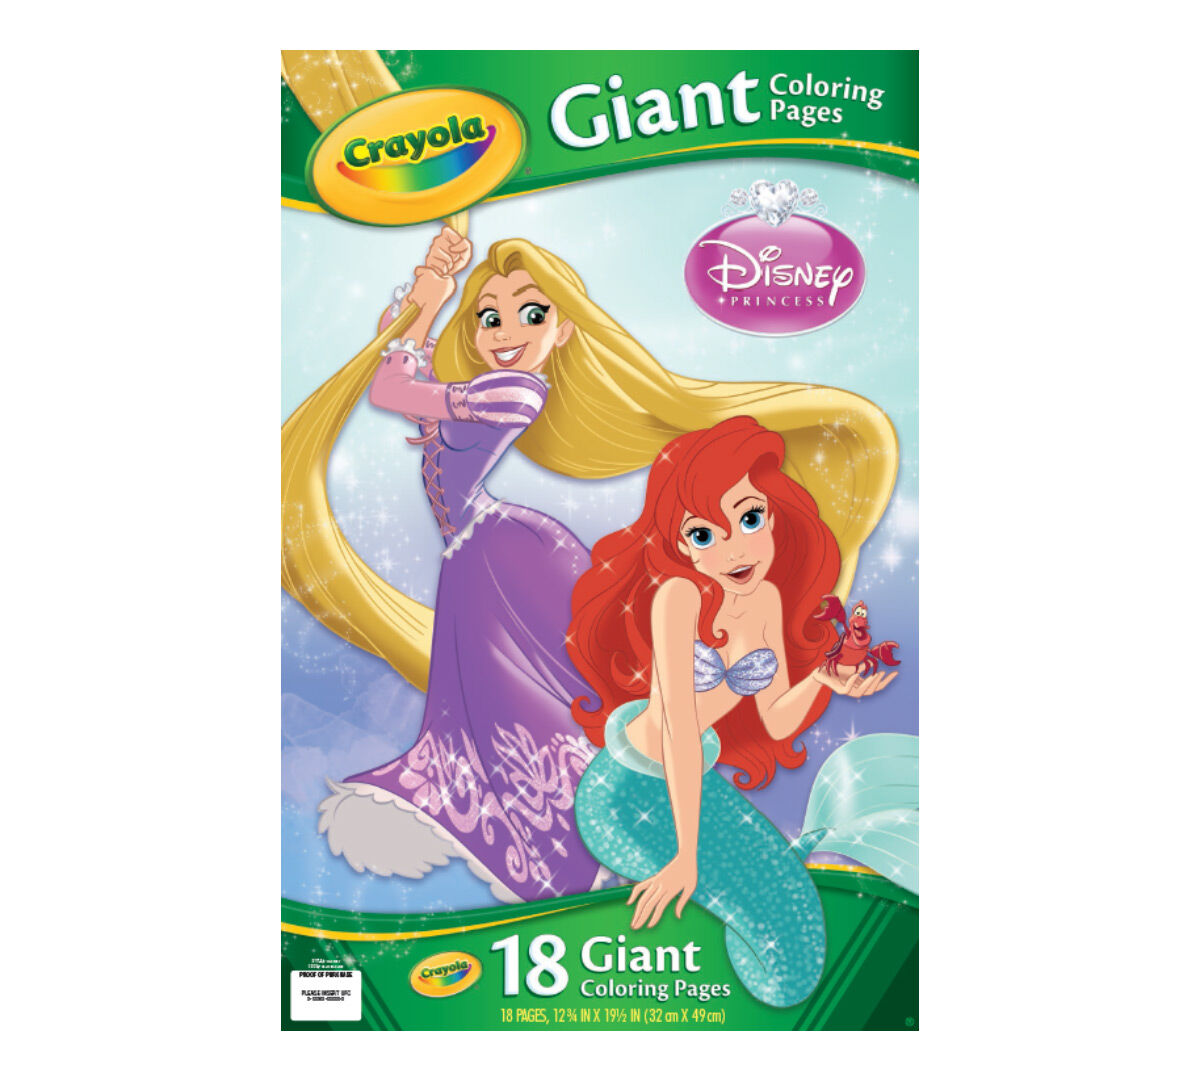 Giant Coloring Pages - Disney Princess